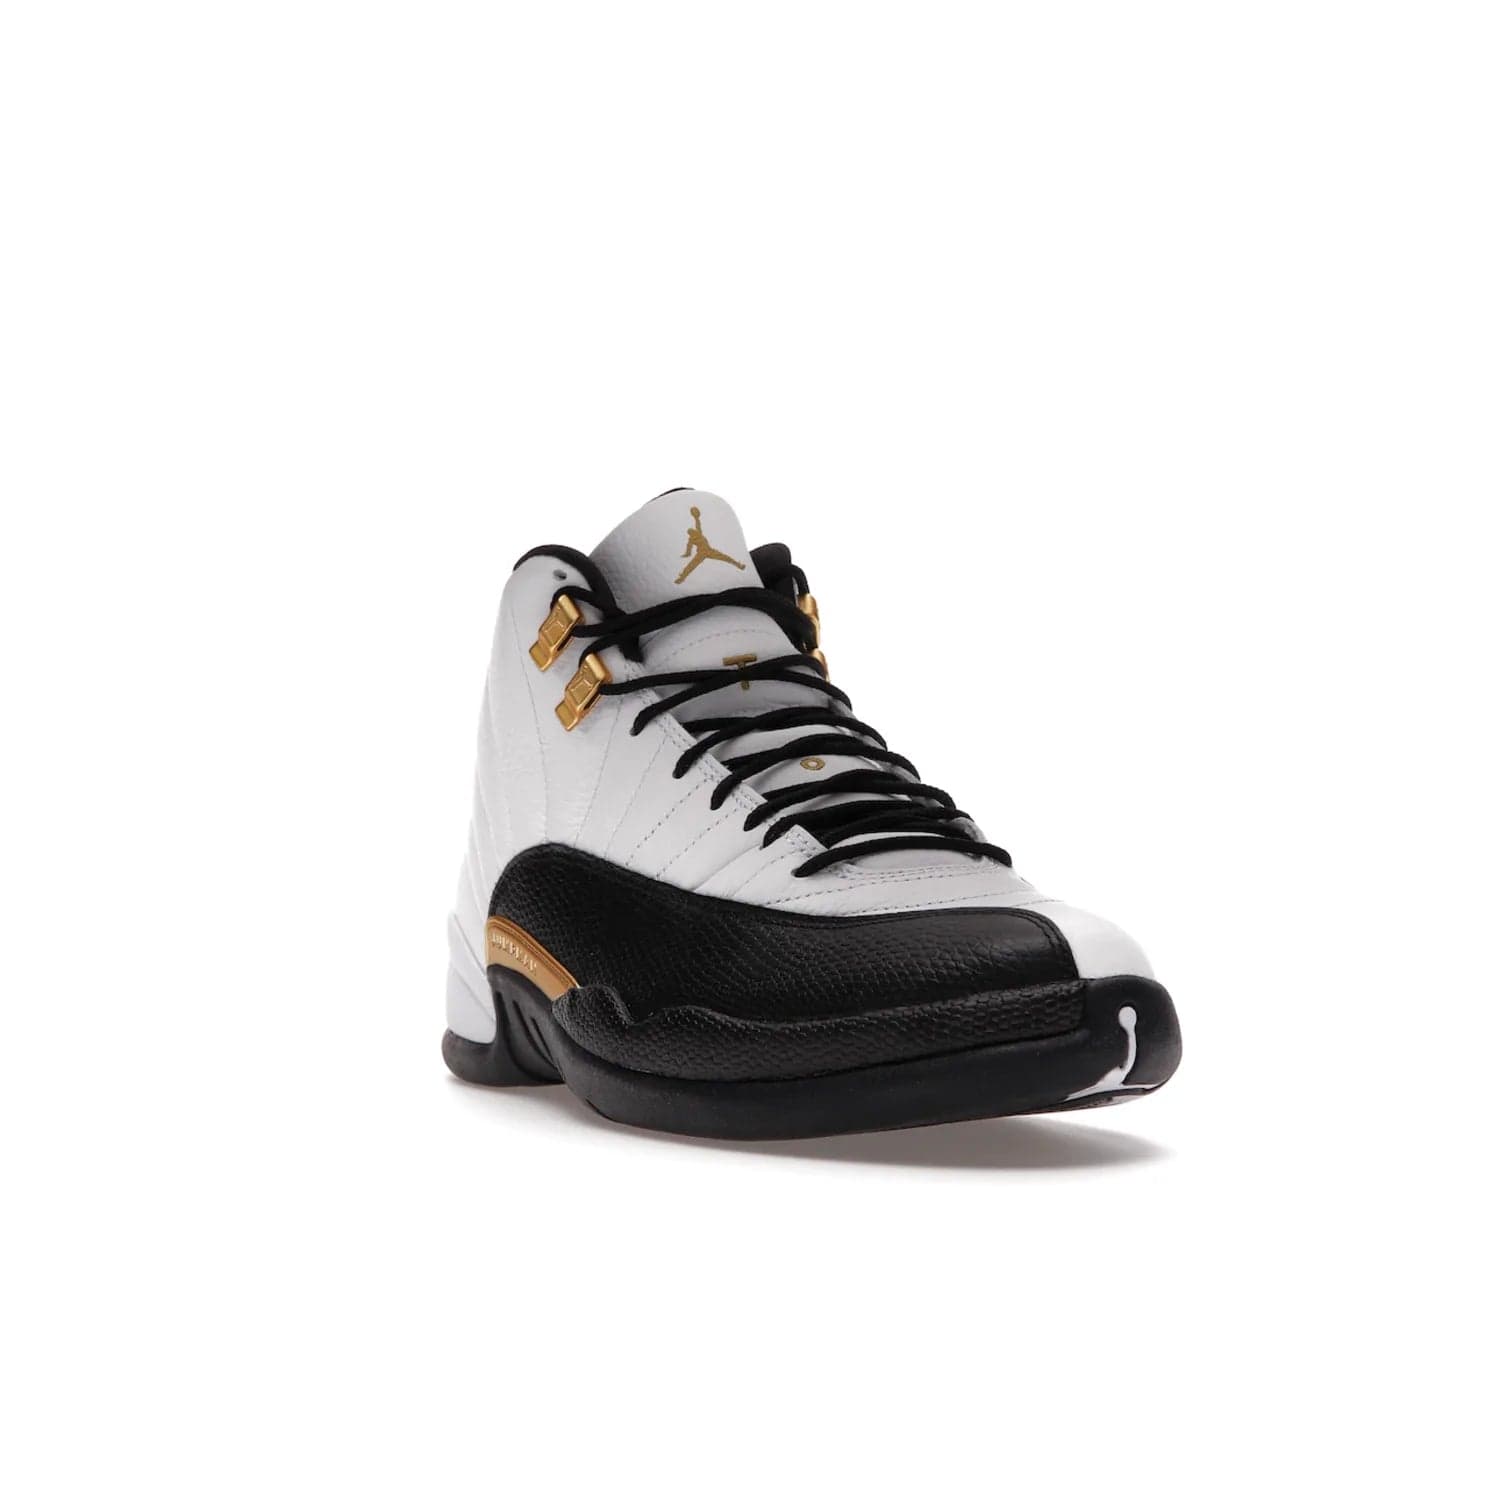 Jordan 12 Retro Royalty Taxi - Image 7 - Only at www.BallersClubKickz.com - Make a statement with the Air Jordan 12 Retro Royalty Taxi. Woven heel tag, gold plaquet, white tumbled leather upper plus a black toe wrap, make this modern take on the classic a must-have. Available in November 2021.